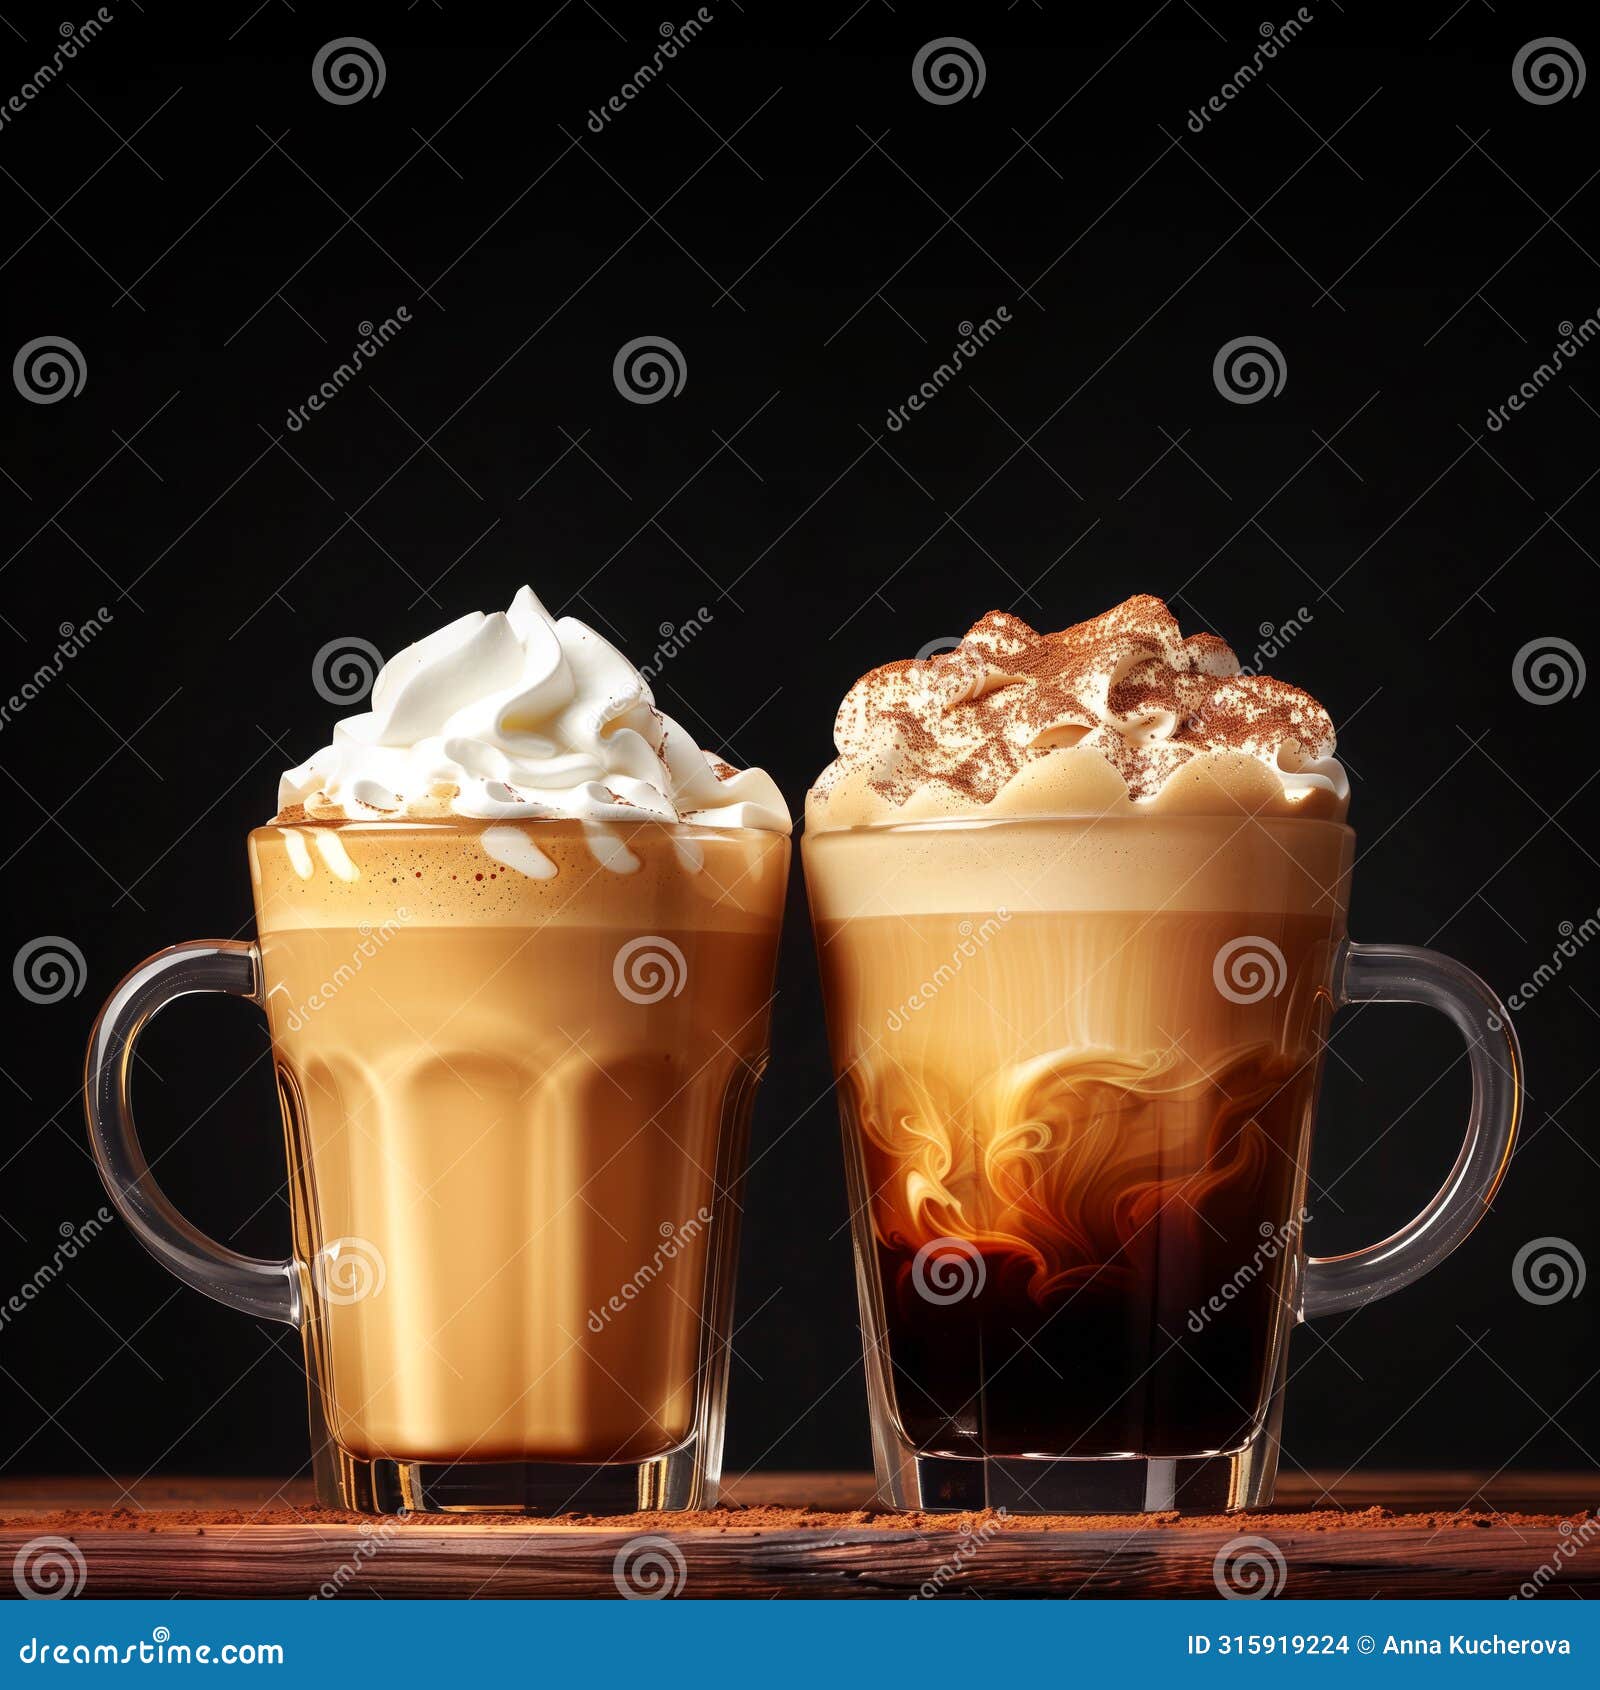 two glasses of layered coffee with whipped cream over dark background